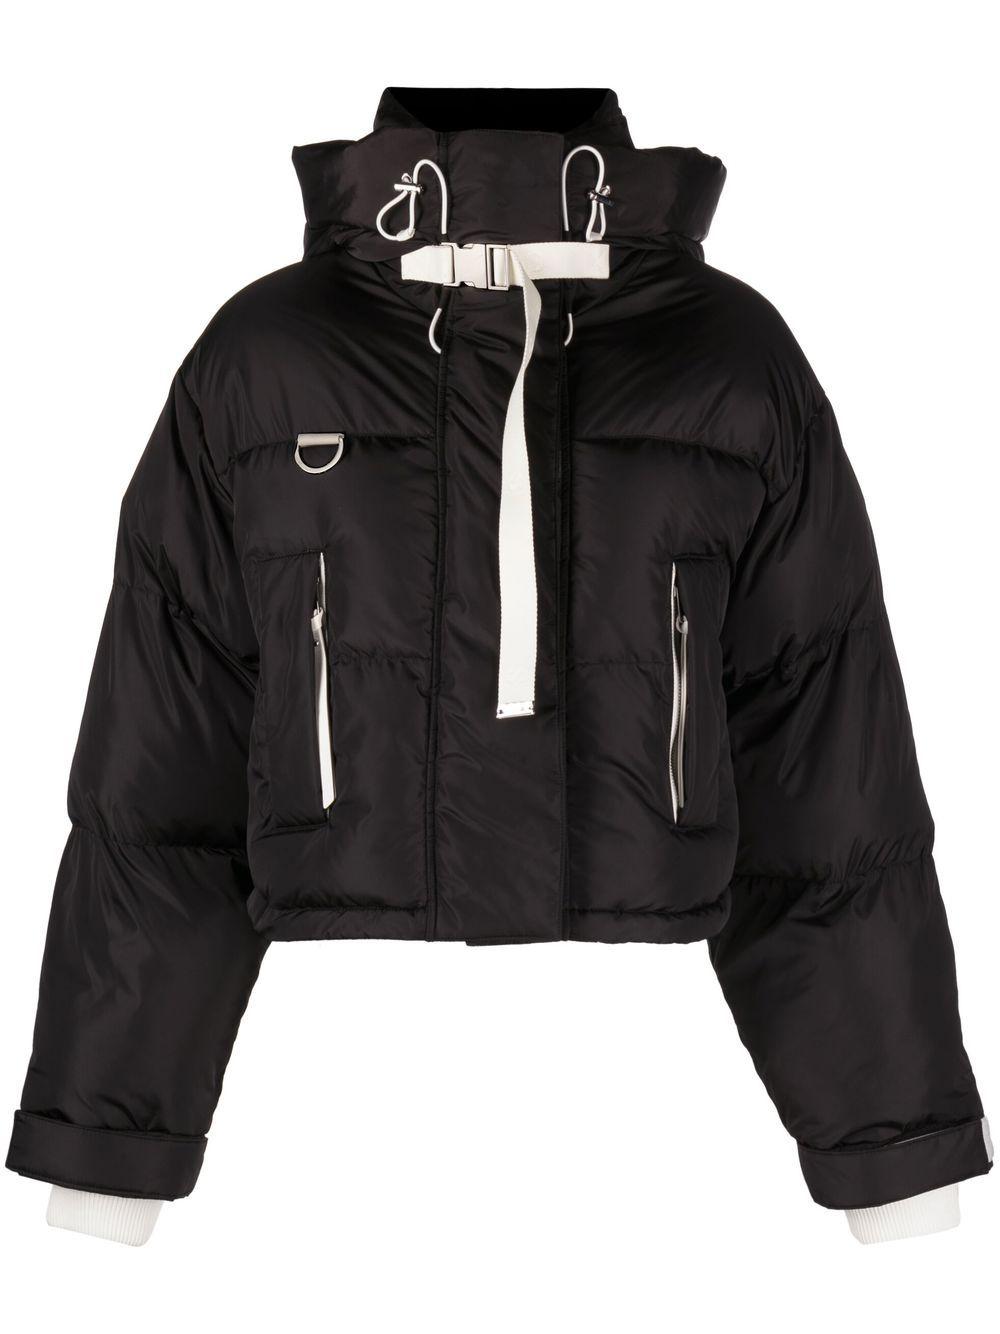 SHOREDITCH SKI CLUB Willow Cropped Puffer Jacket in Black | Lyst